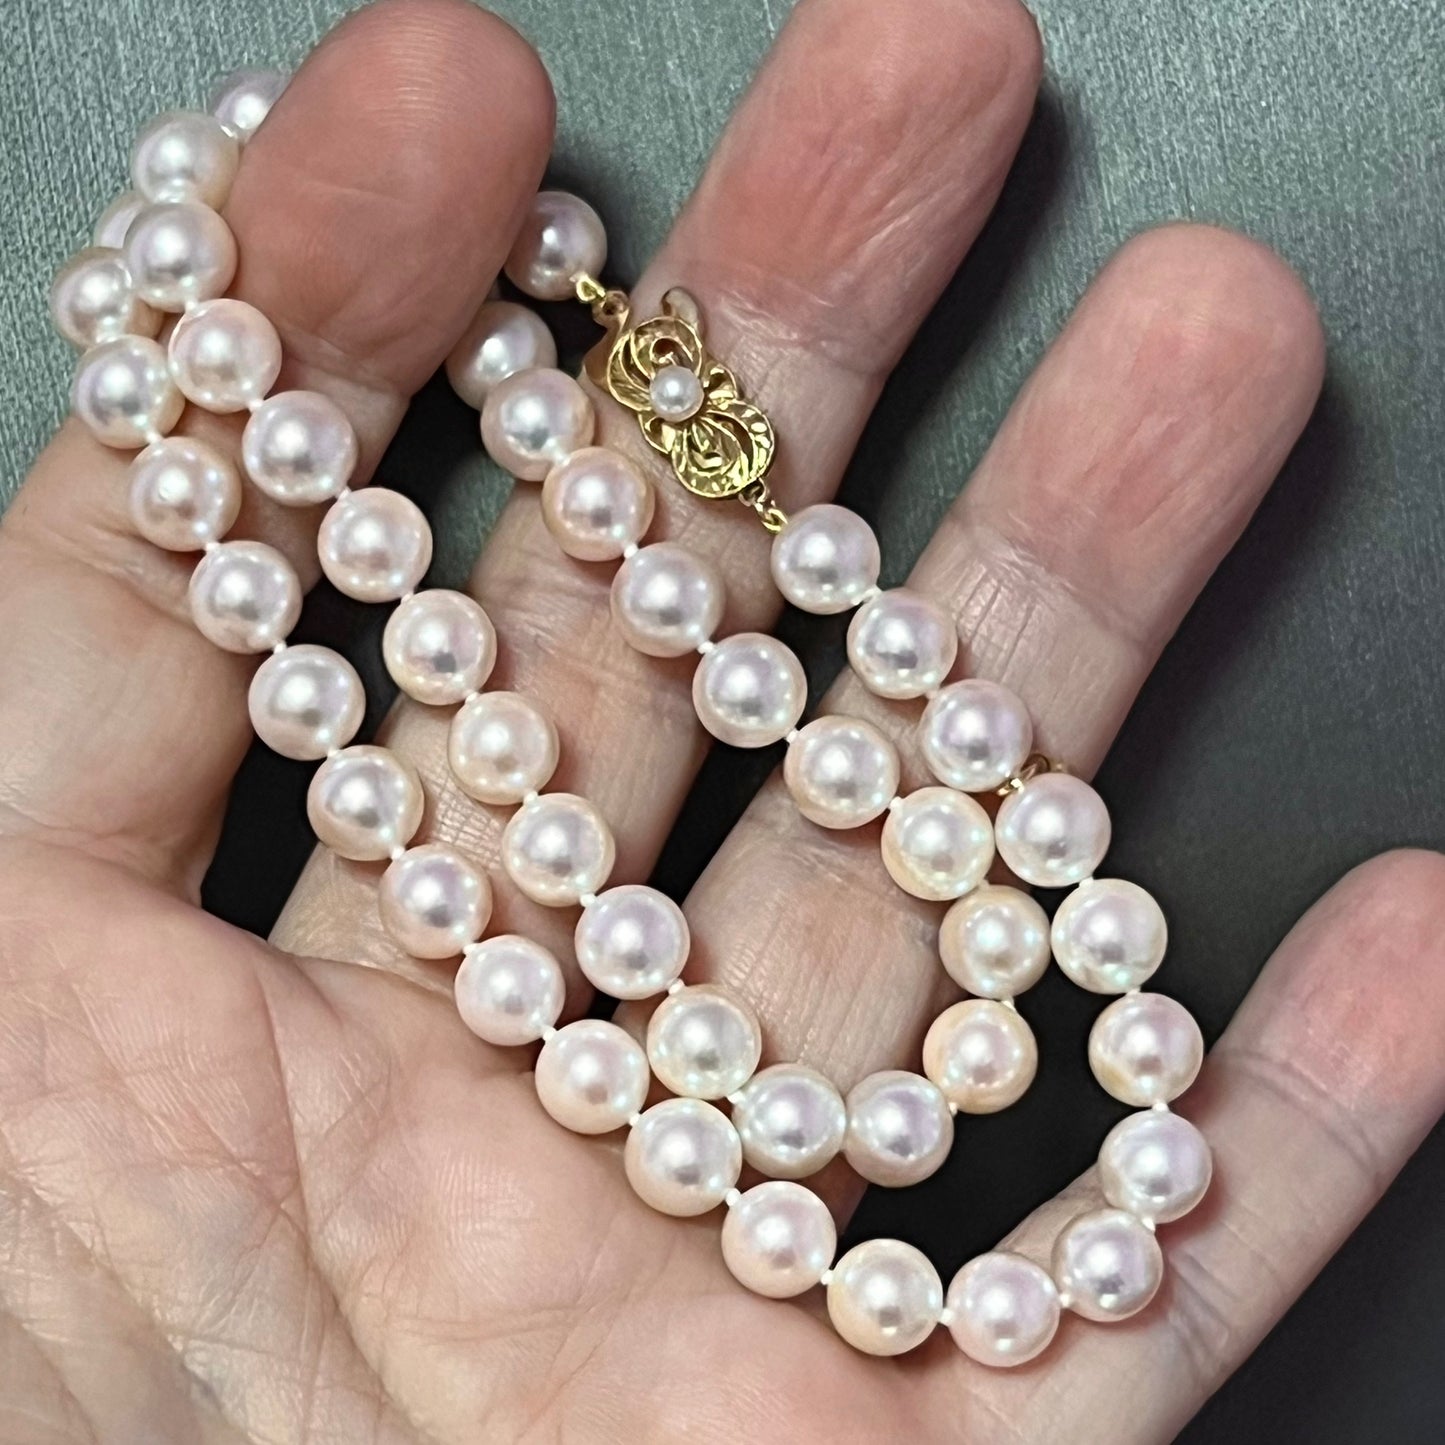 Mikimoto Estate Akoya Pearl Necklace 17" 18k Y Gold 8 mm Certified $11,450 311934